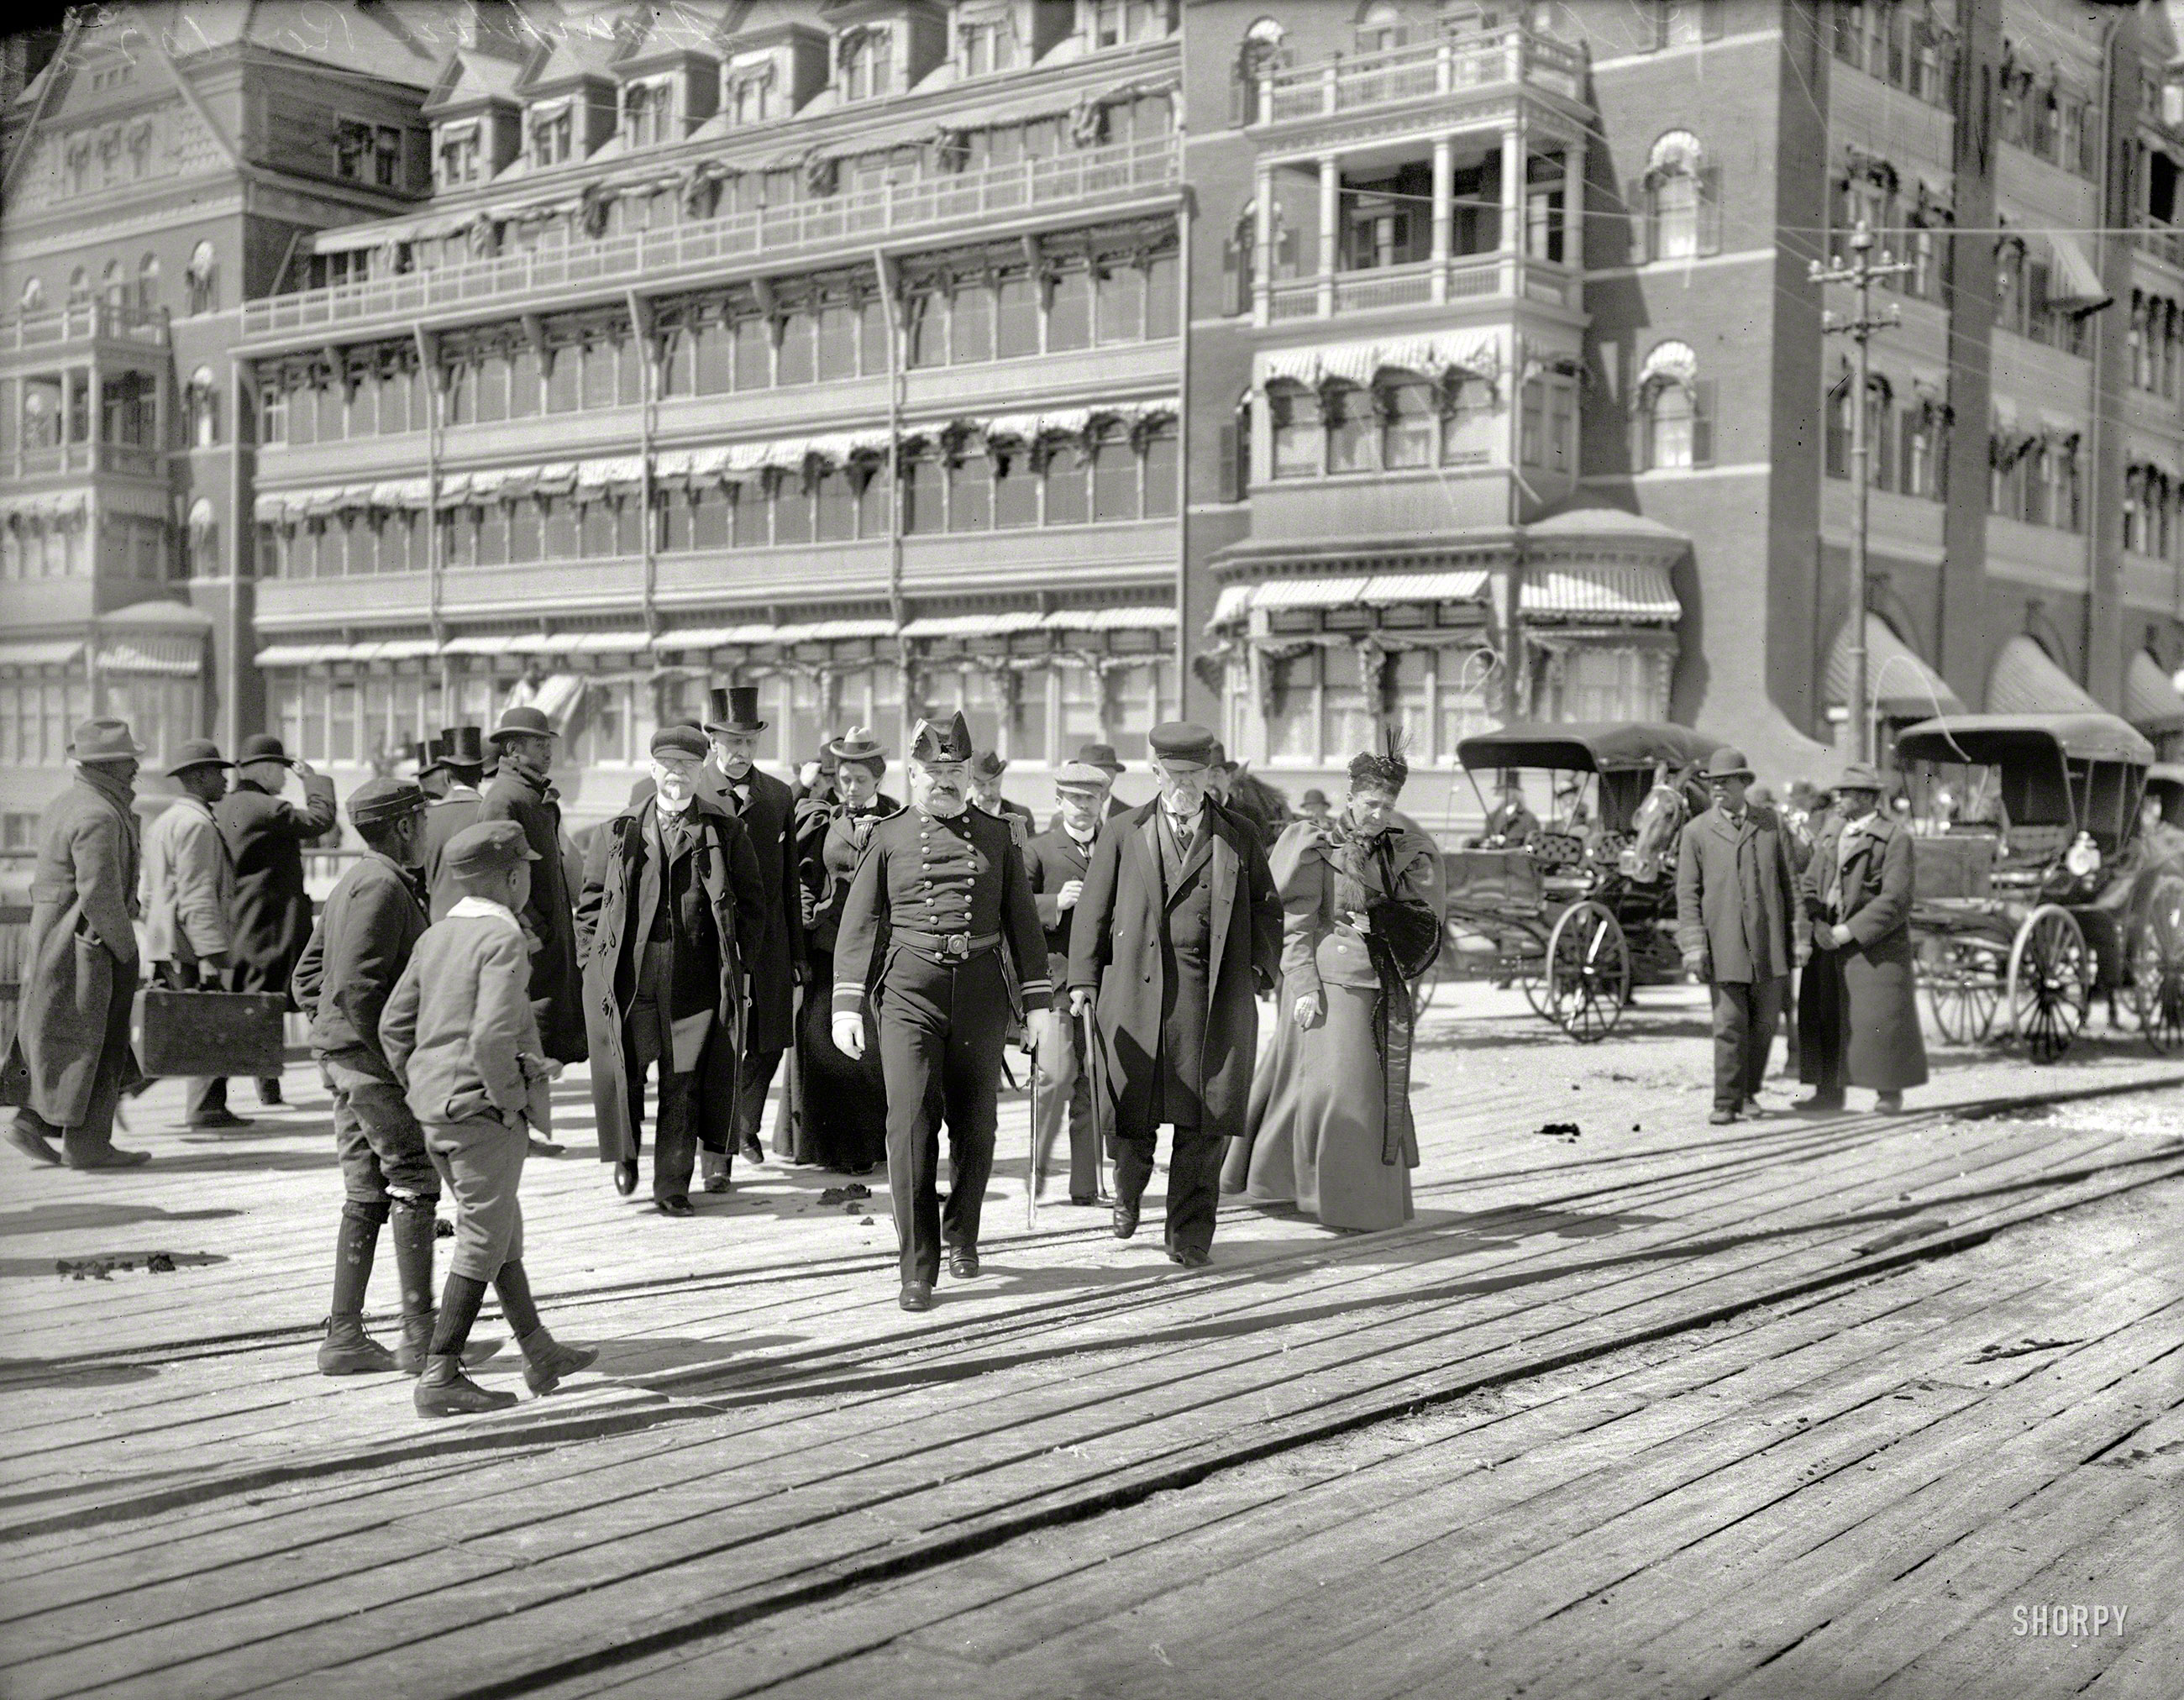 Hampton Roads, Virginia, circa 1900. "Going to the landing stage. Hotel Chamberlin in background." Although the harbor might not be mined, the street is. 8x10 inch glass negative, Detroit Photographic Company. View full size.